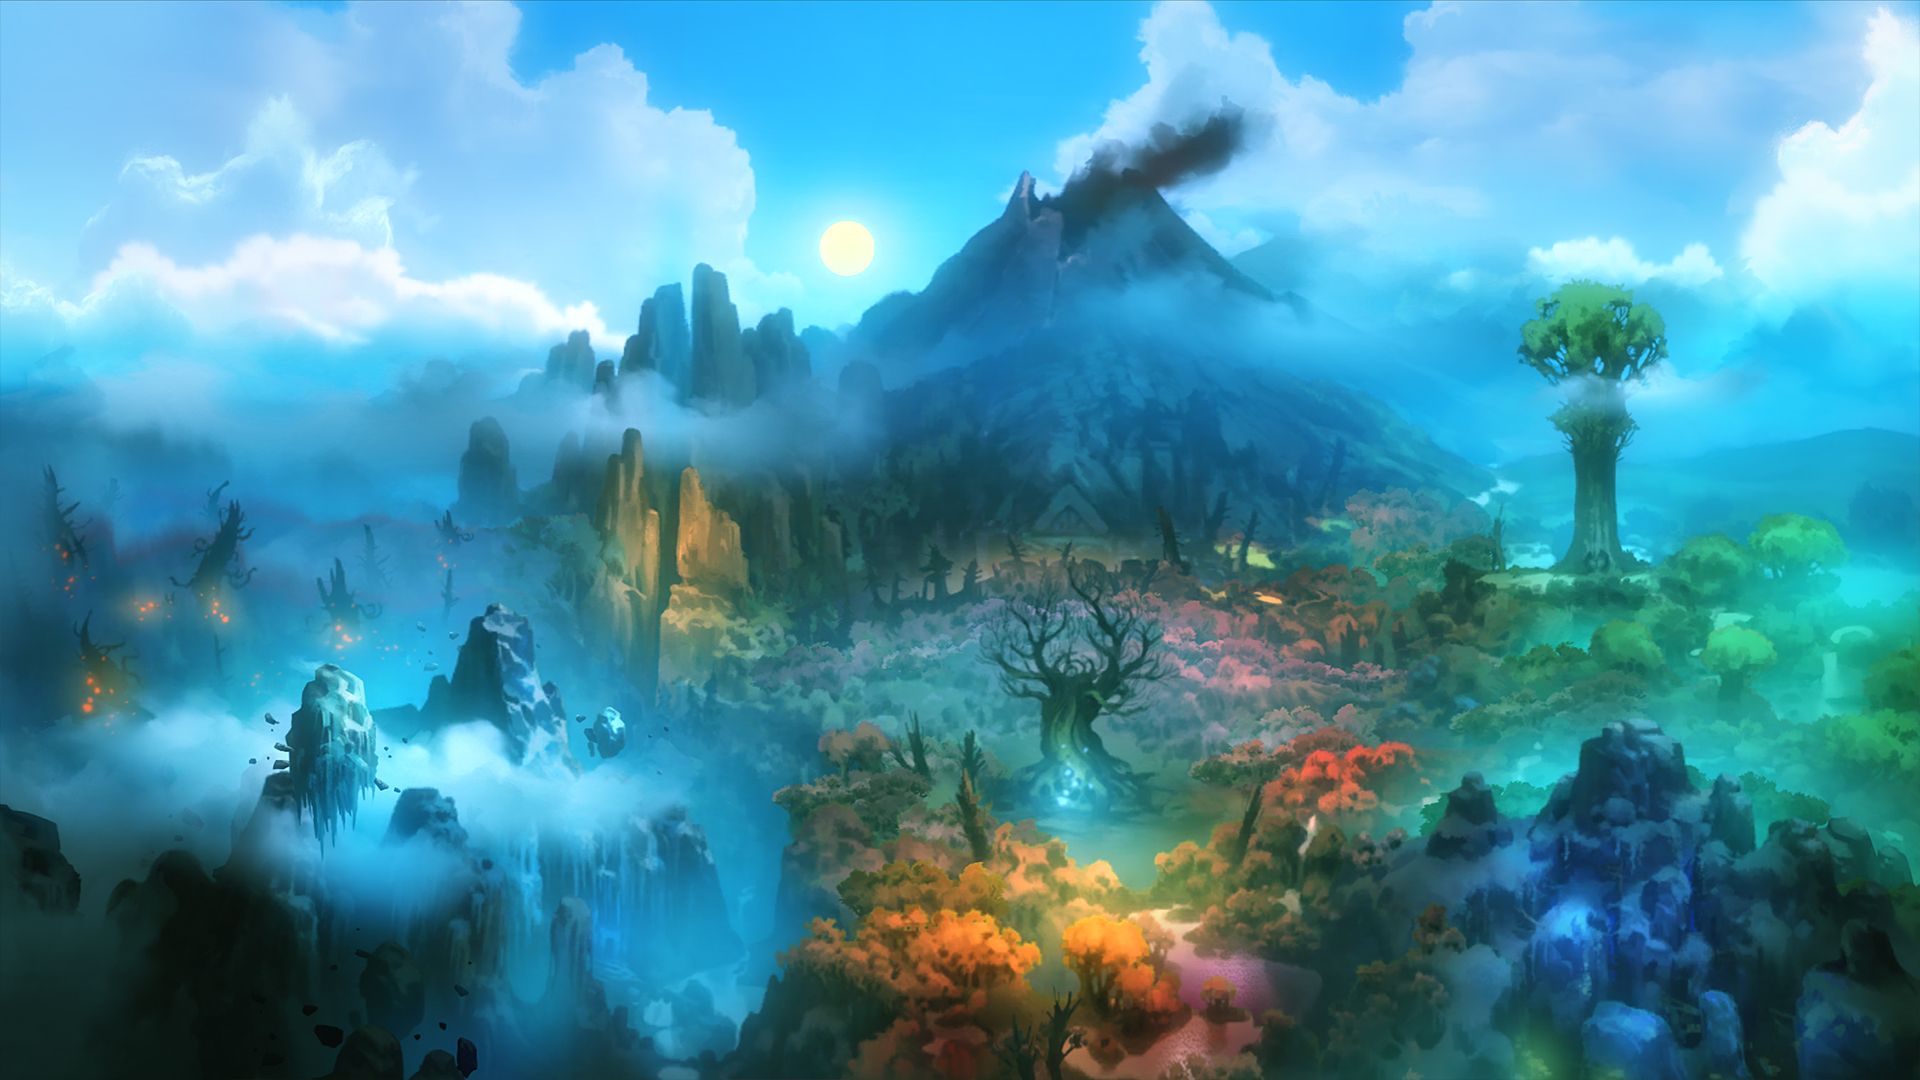 Free download Wonderful Ori and the Blind Forest Wallpaper Full HD